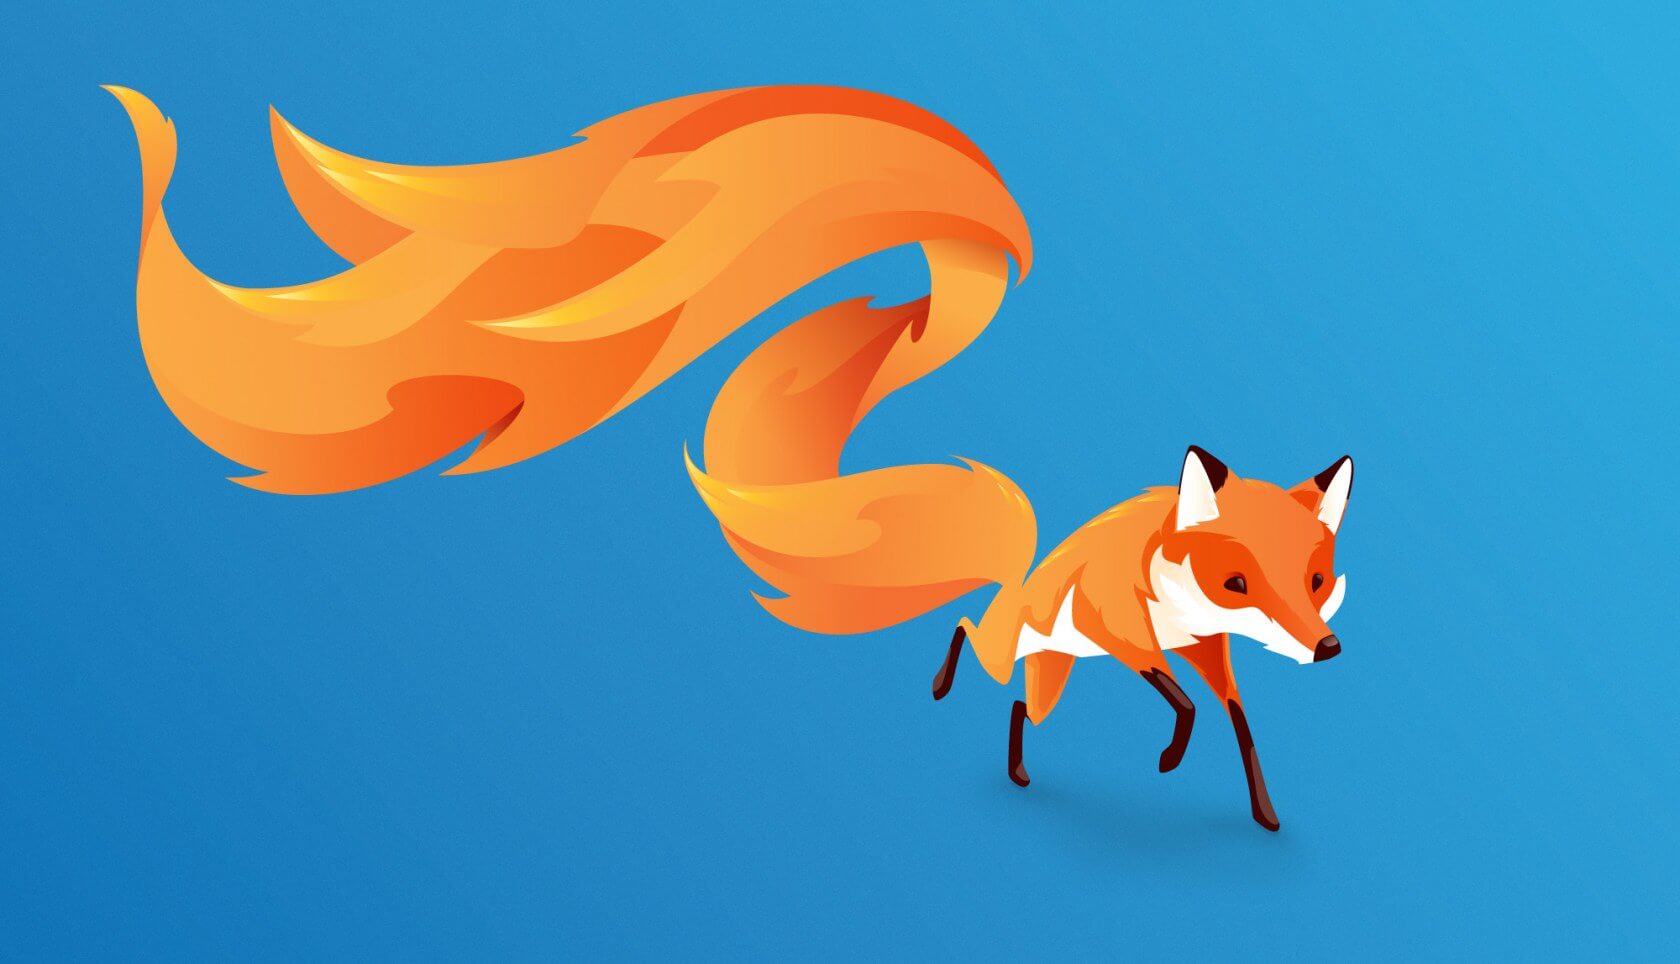 Firefox 65 wants to give you more control over your internet privacy